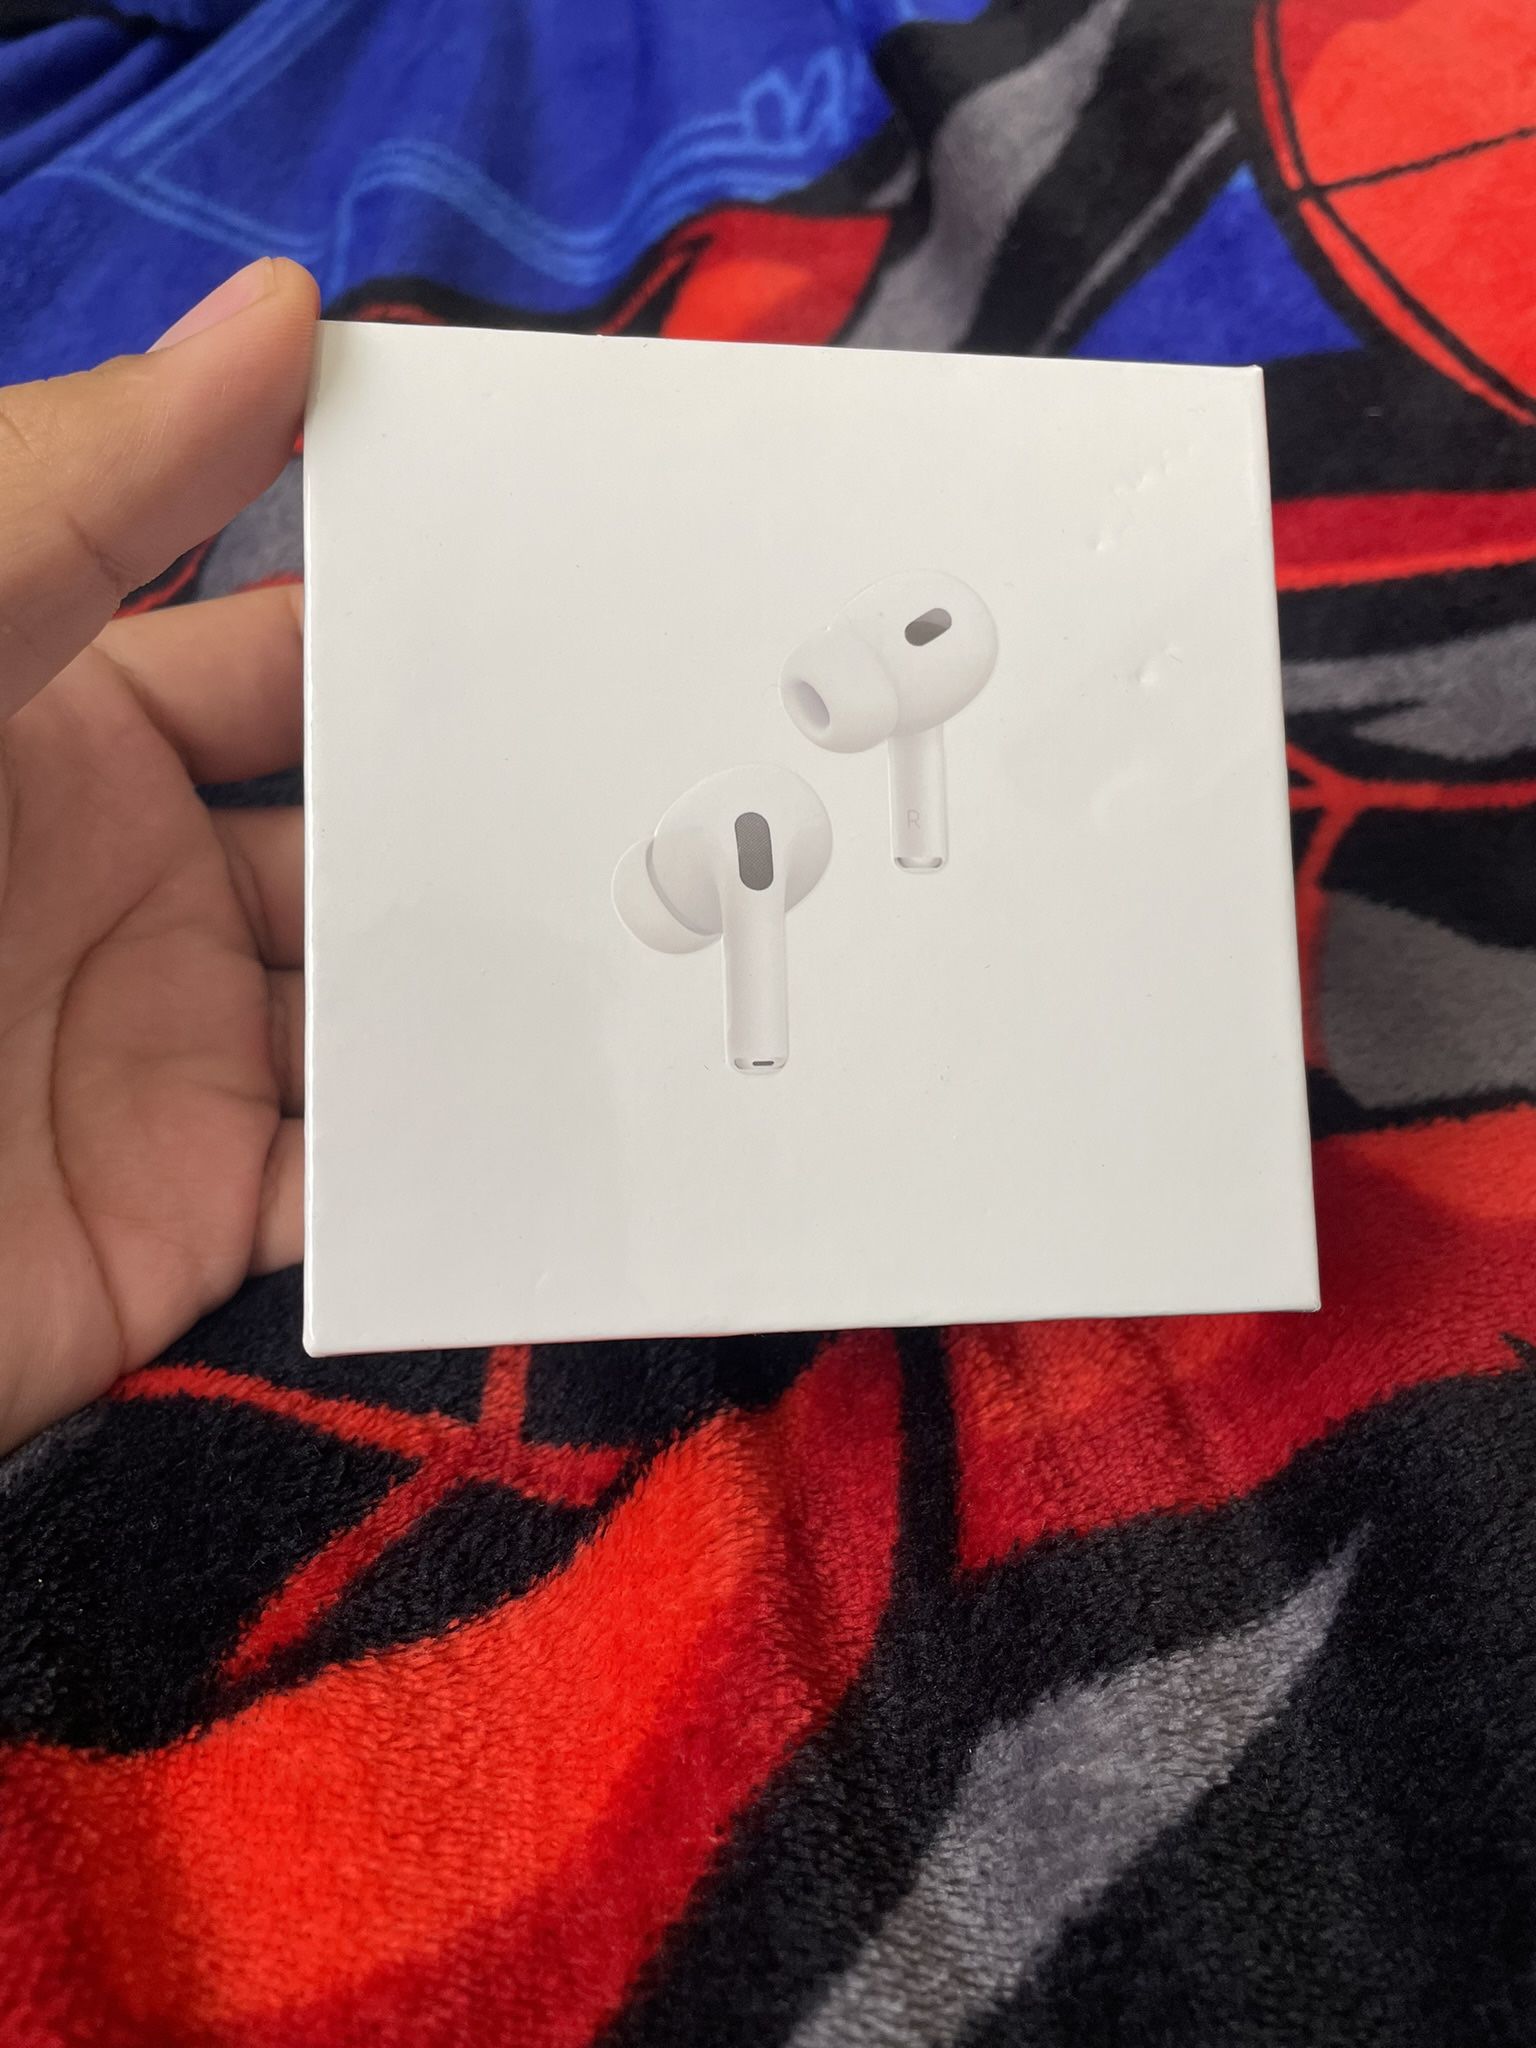 AirPods Pro 